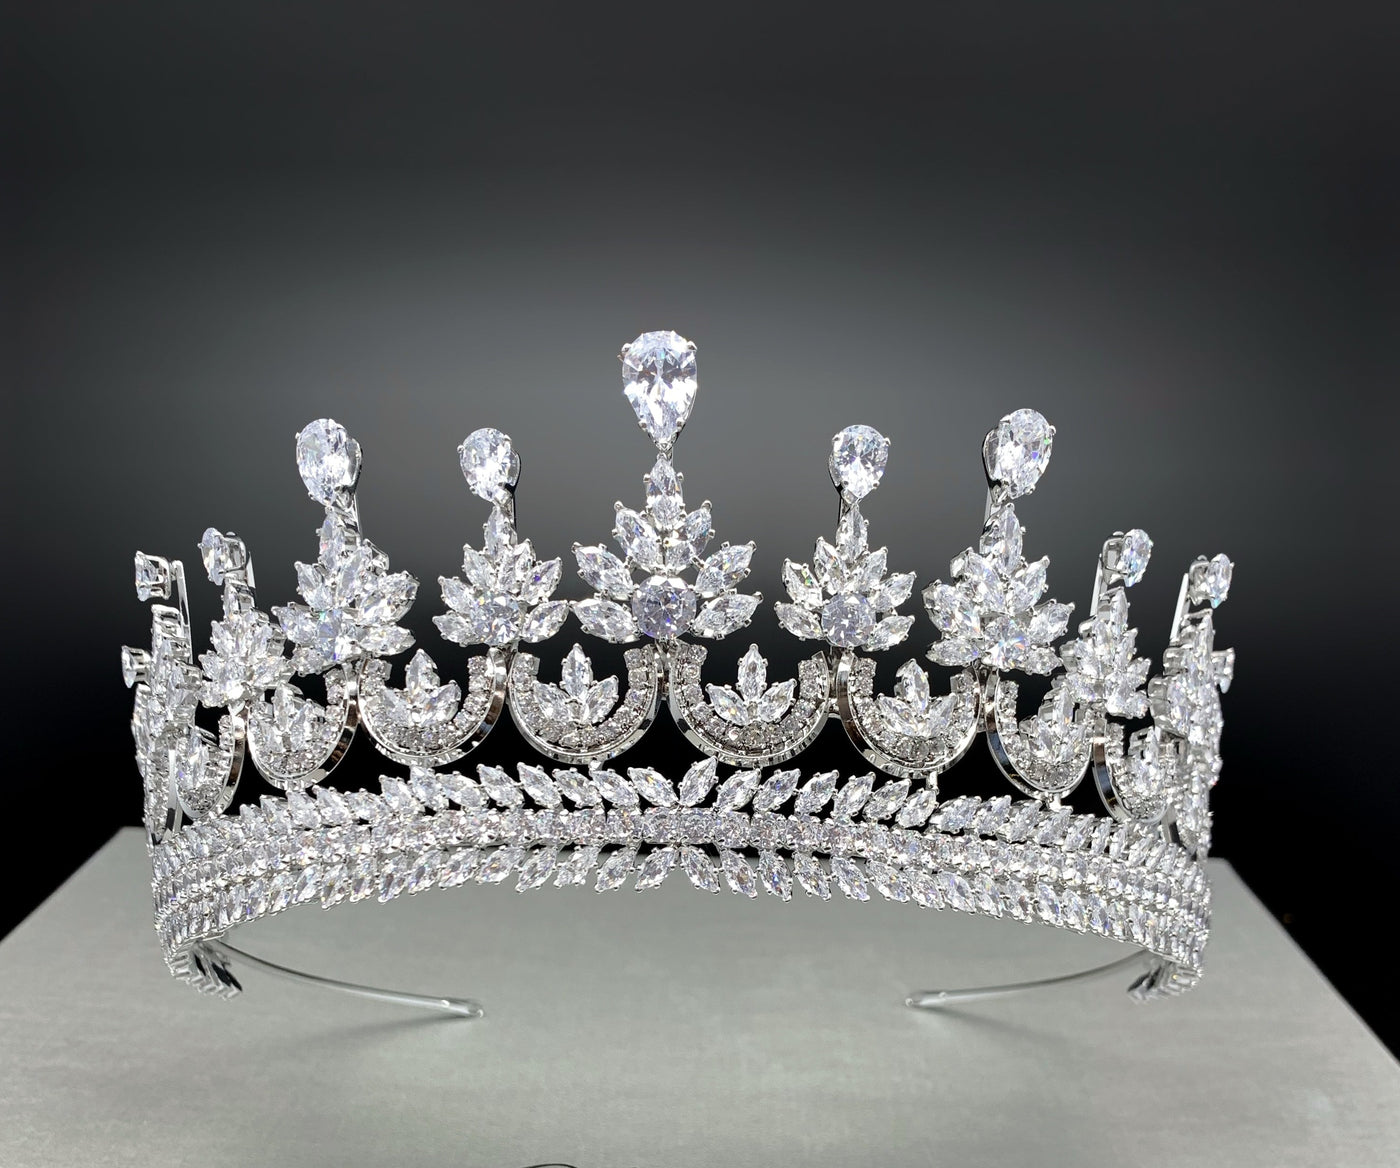  Zirconia Tiara Gold & Silver ideal for all celebrations by Lucky Collections ™